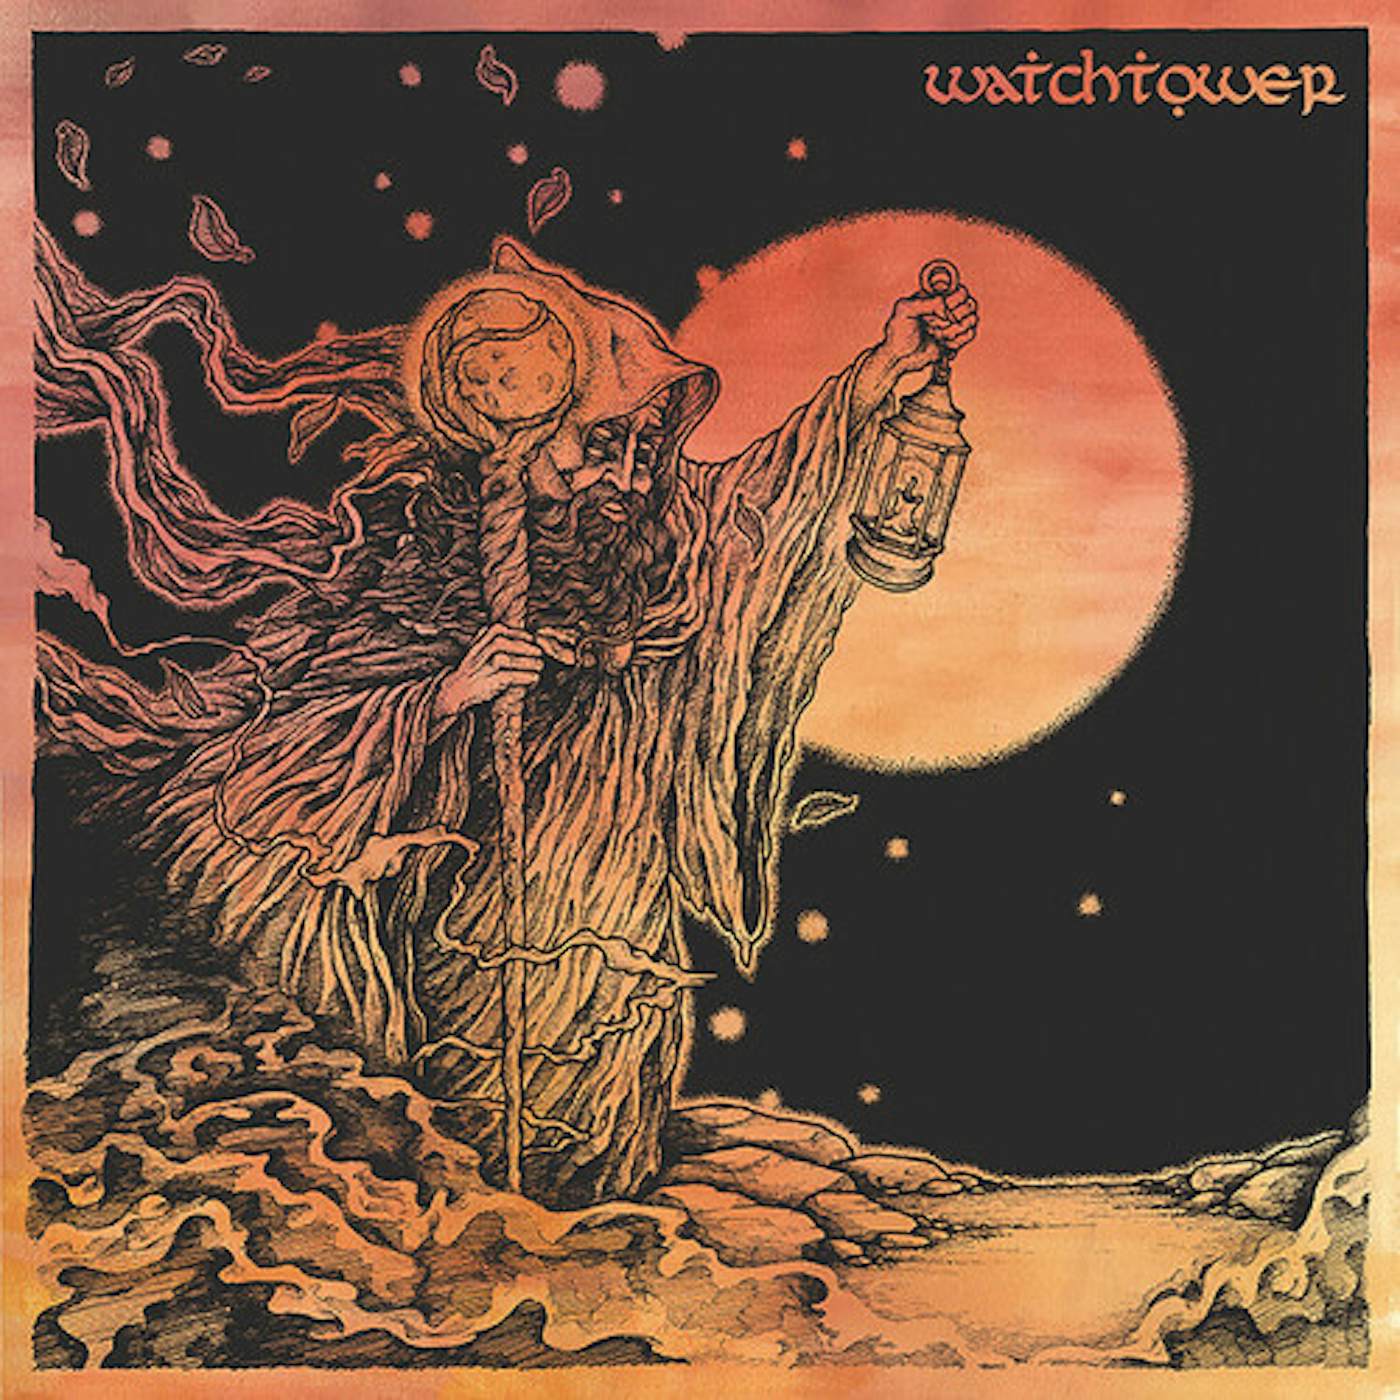 Watchtower RADIANT MOON (MILKY CLEAR / CLASSIC BLACK COLOR) Vinyl Record